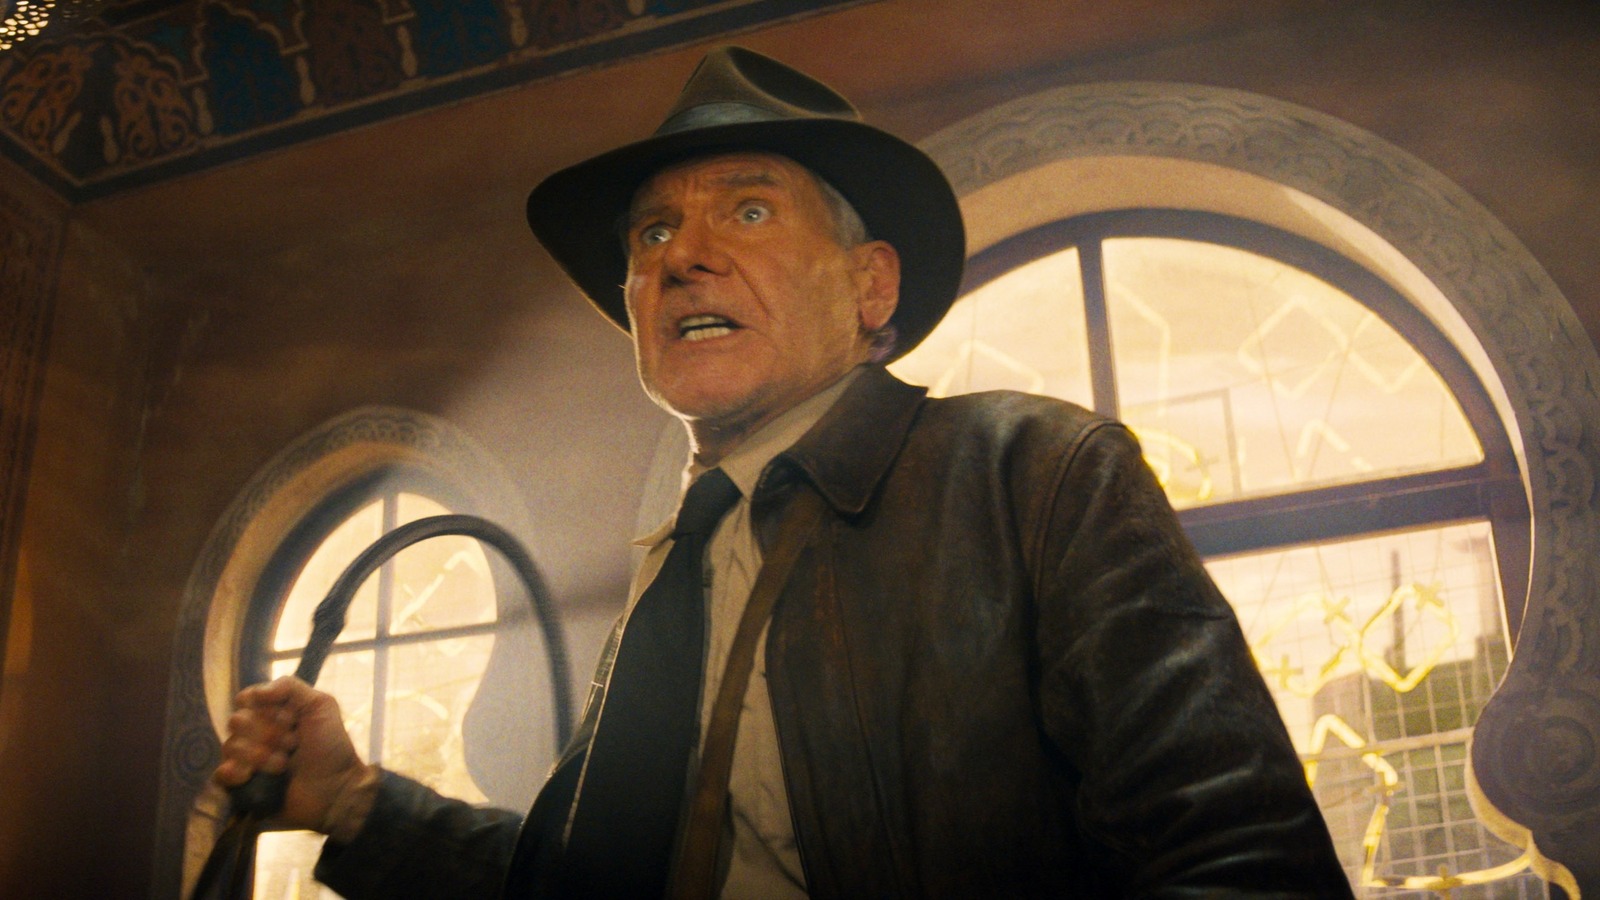 Indiana Jones 5 Director Explains How The Film's Action Defines Indy & More